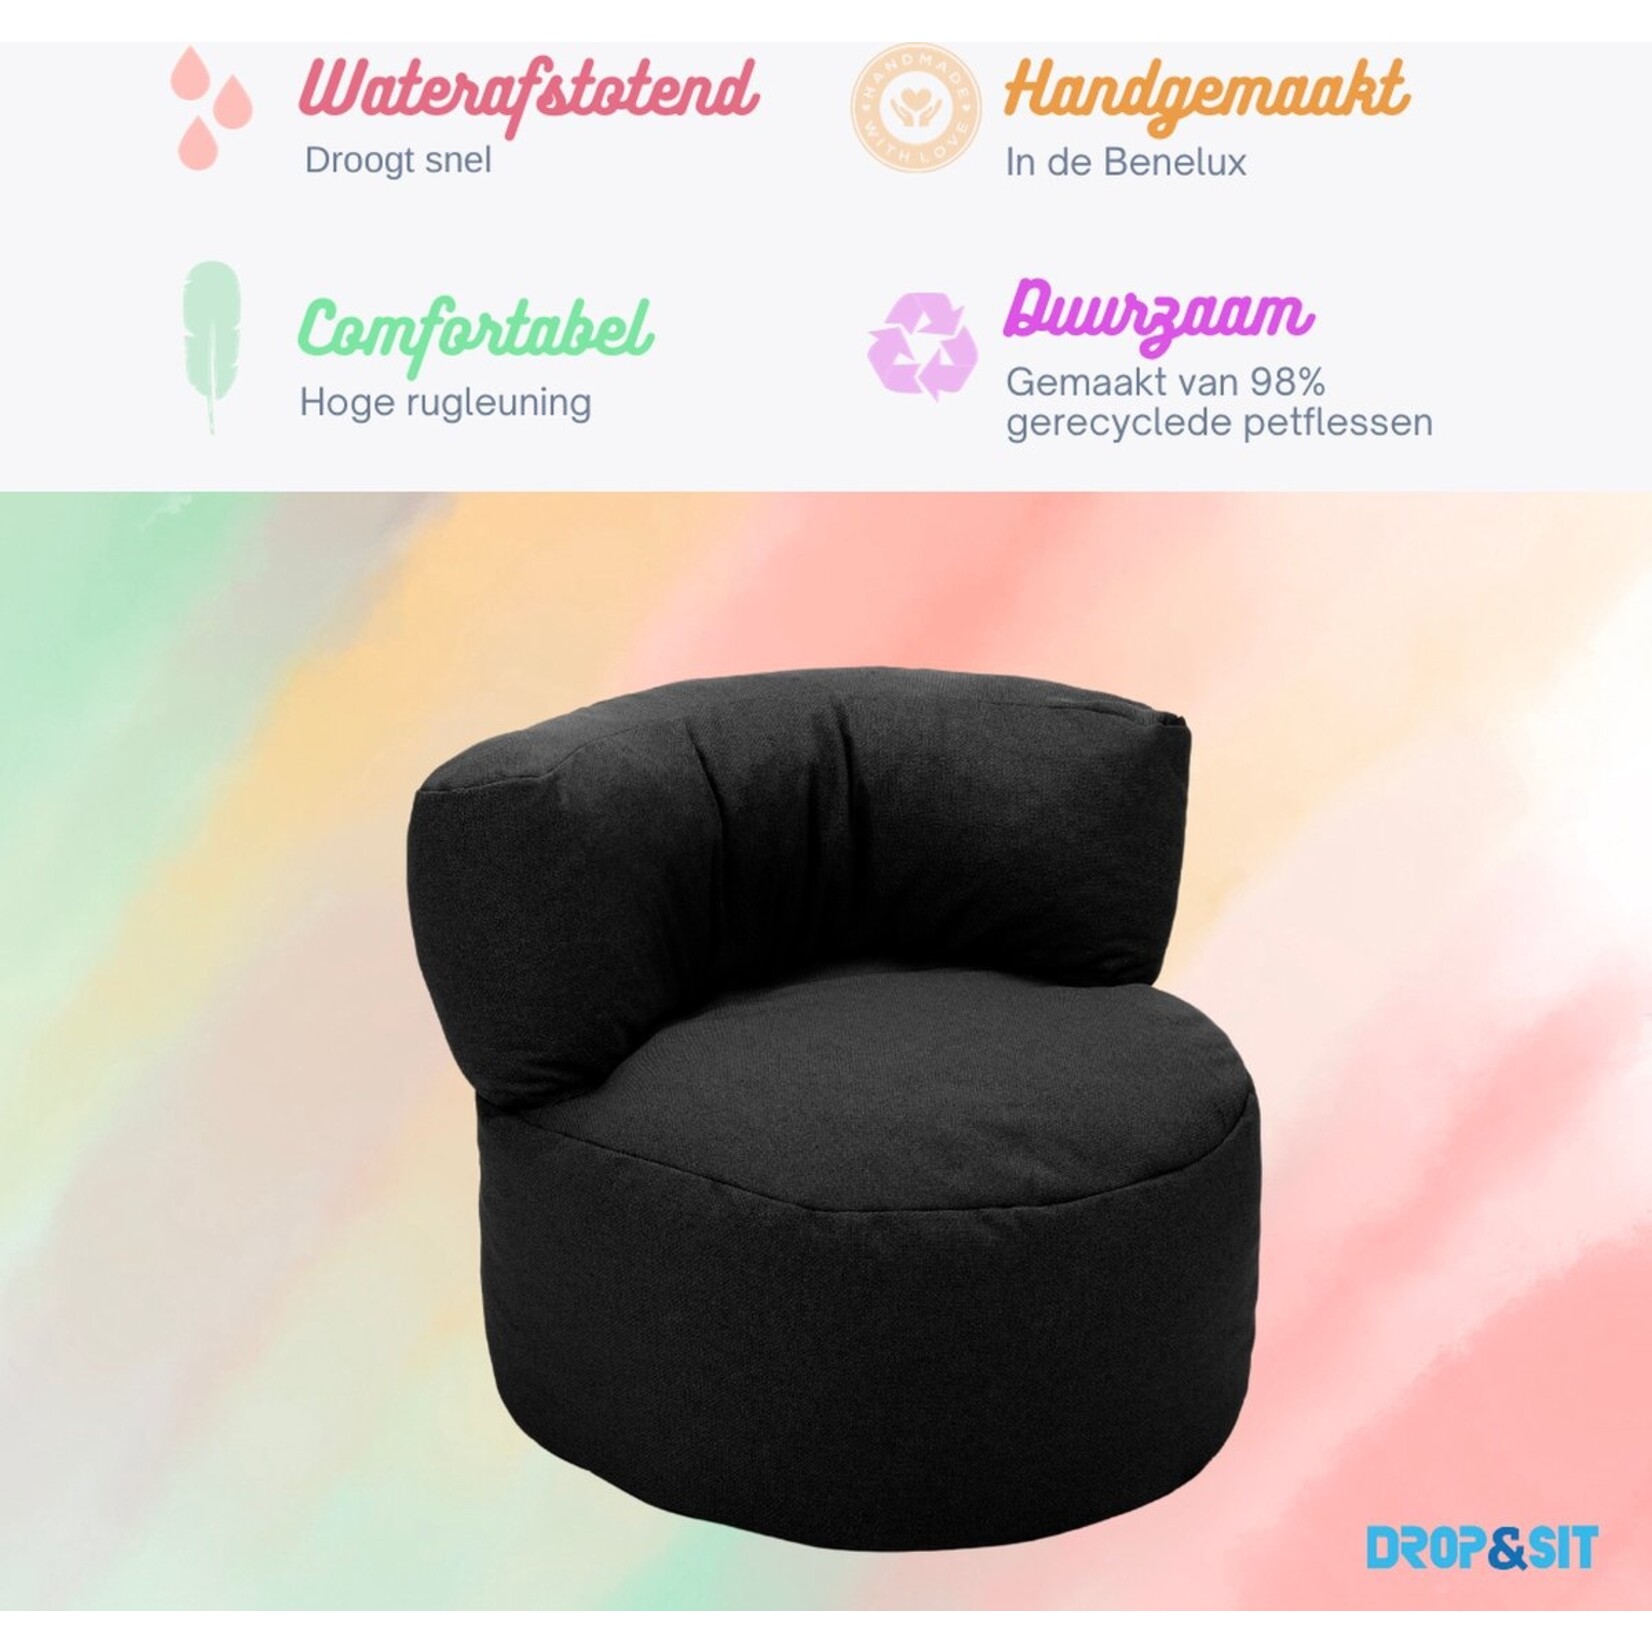 Drop & Sit - Beanbag Chair Junior - Black - 70 x 50 cm - High chair with filling for Indoors